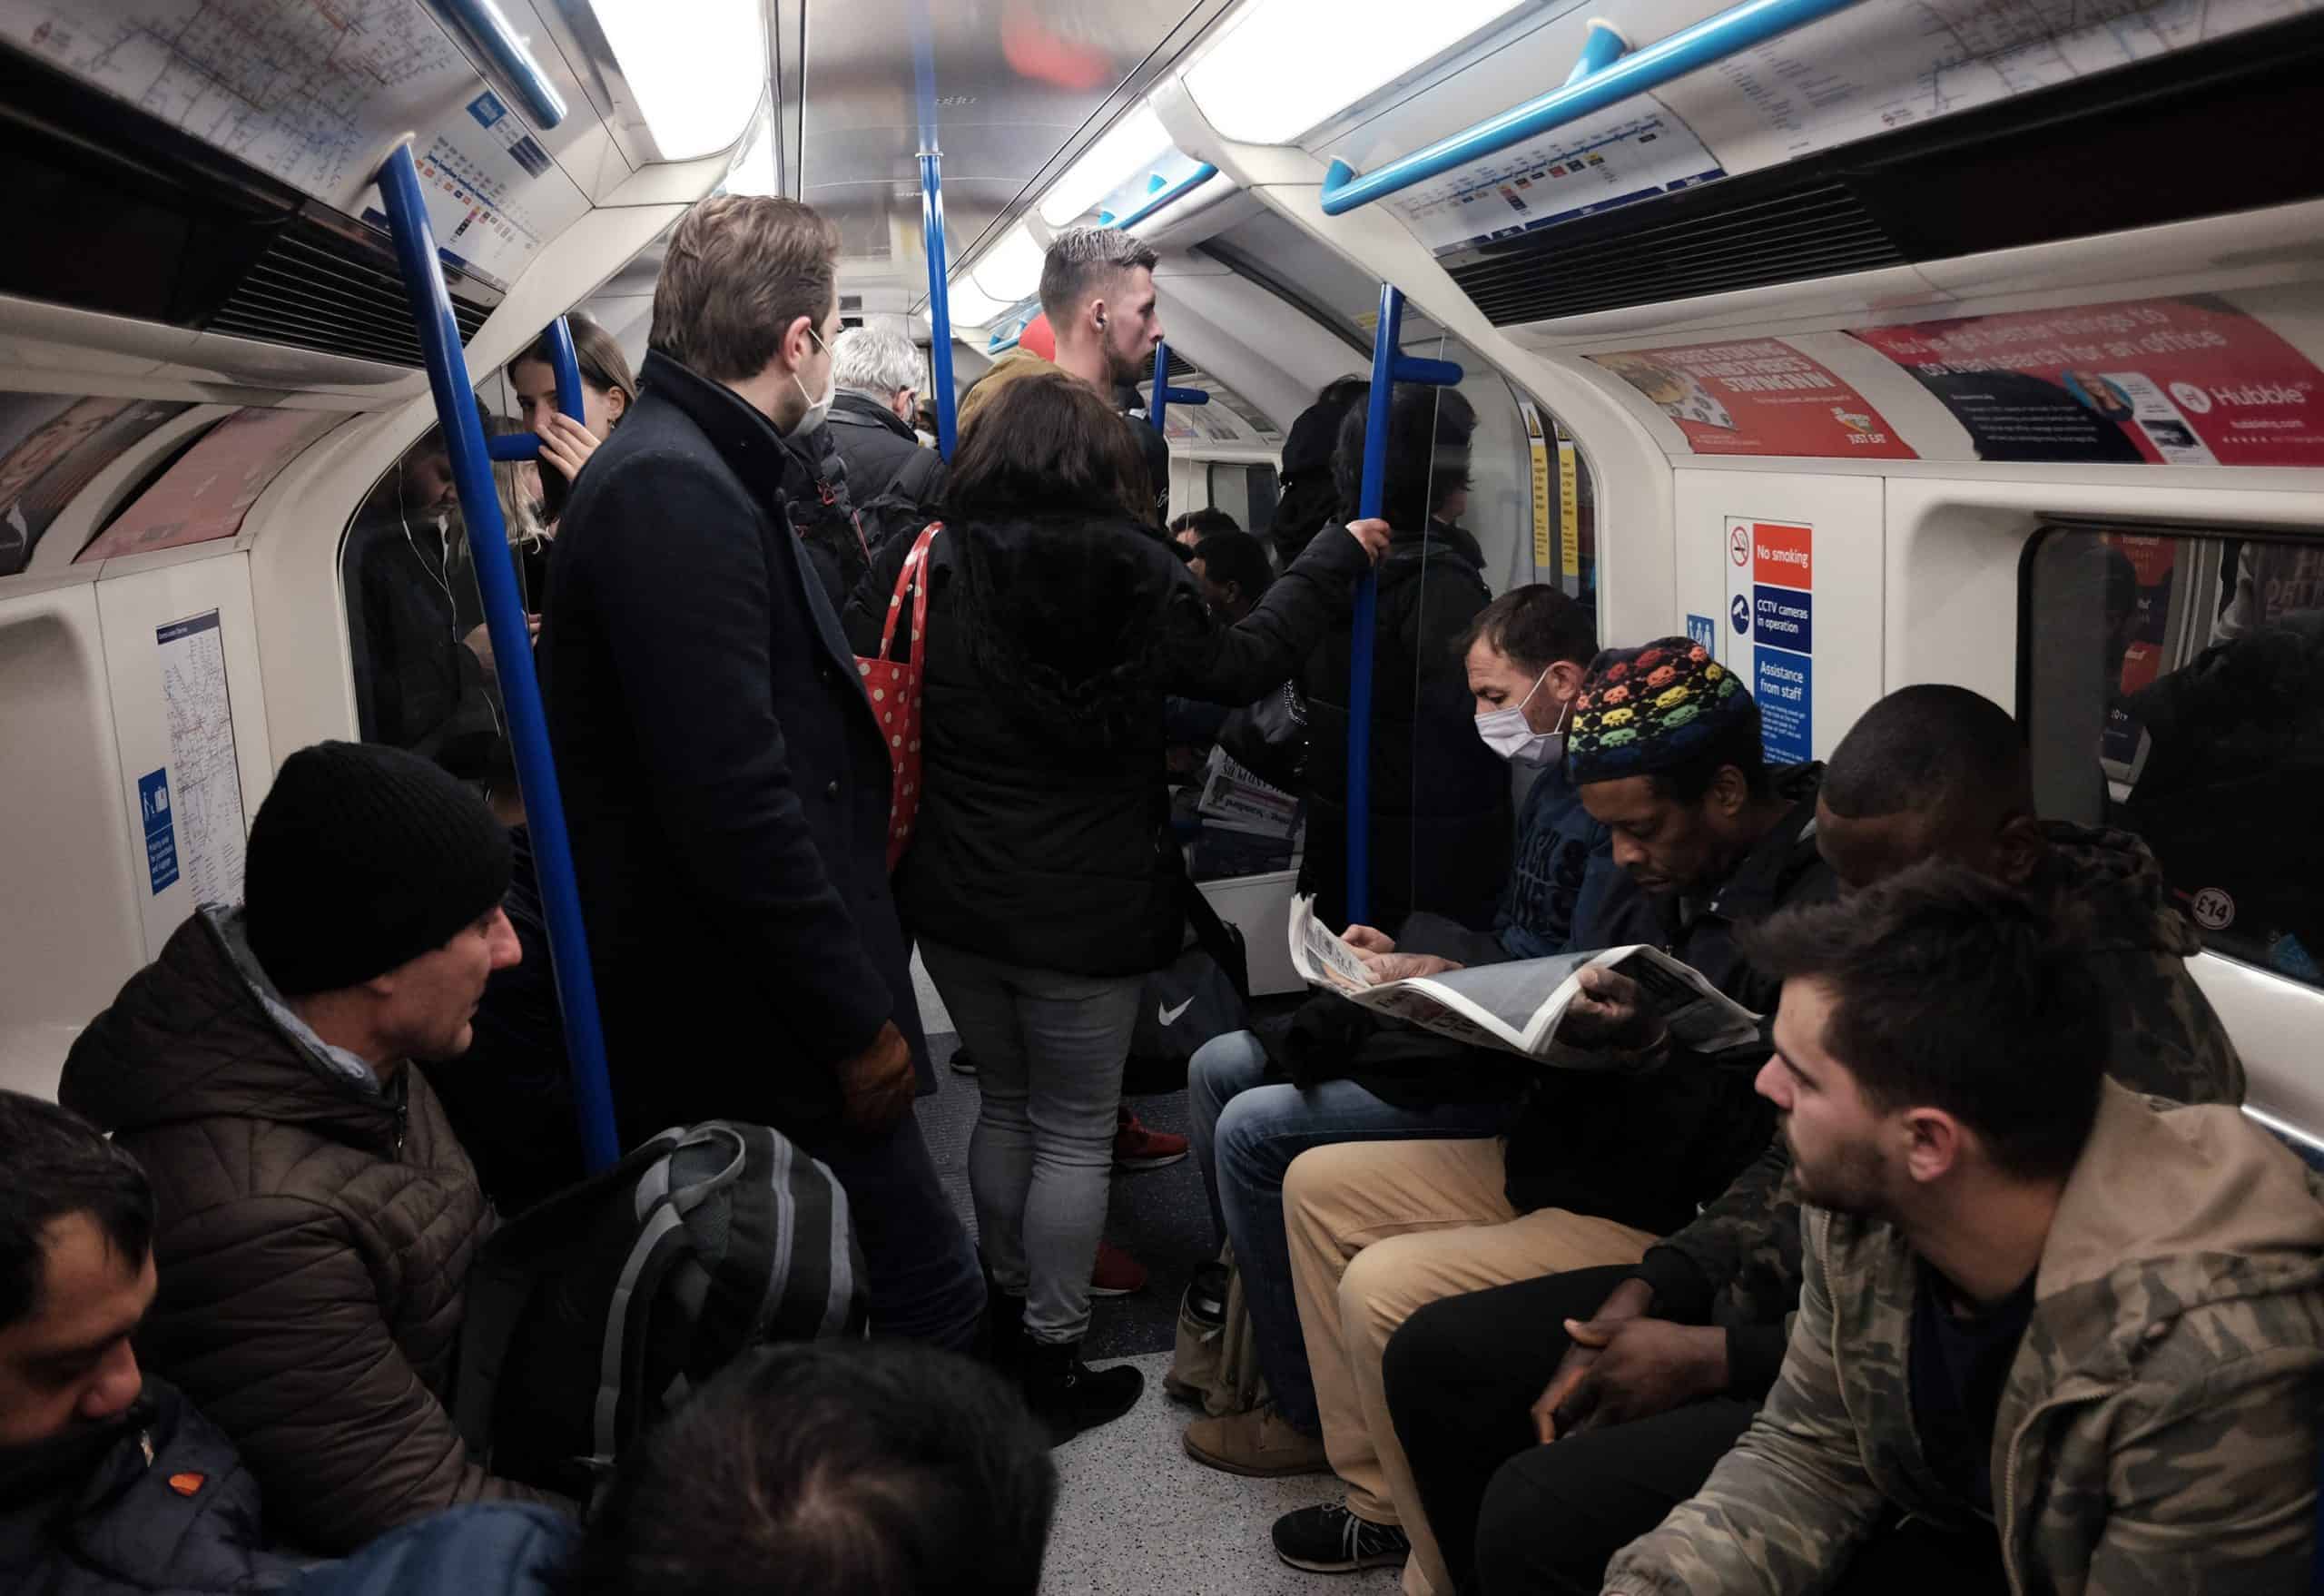 Tube carriages remain packed as politicians row over service levels